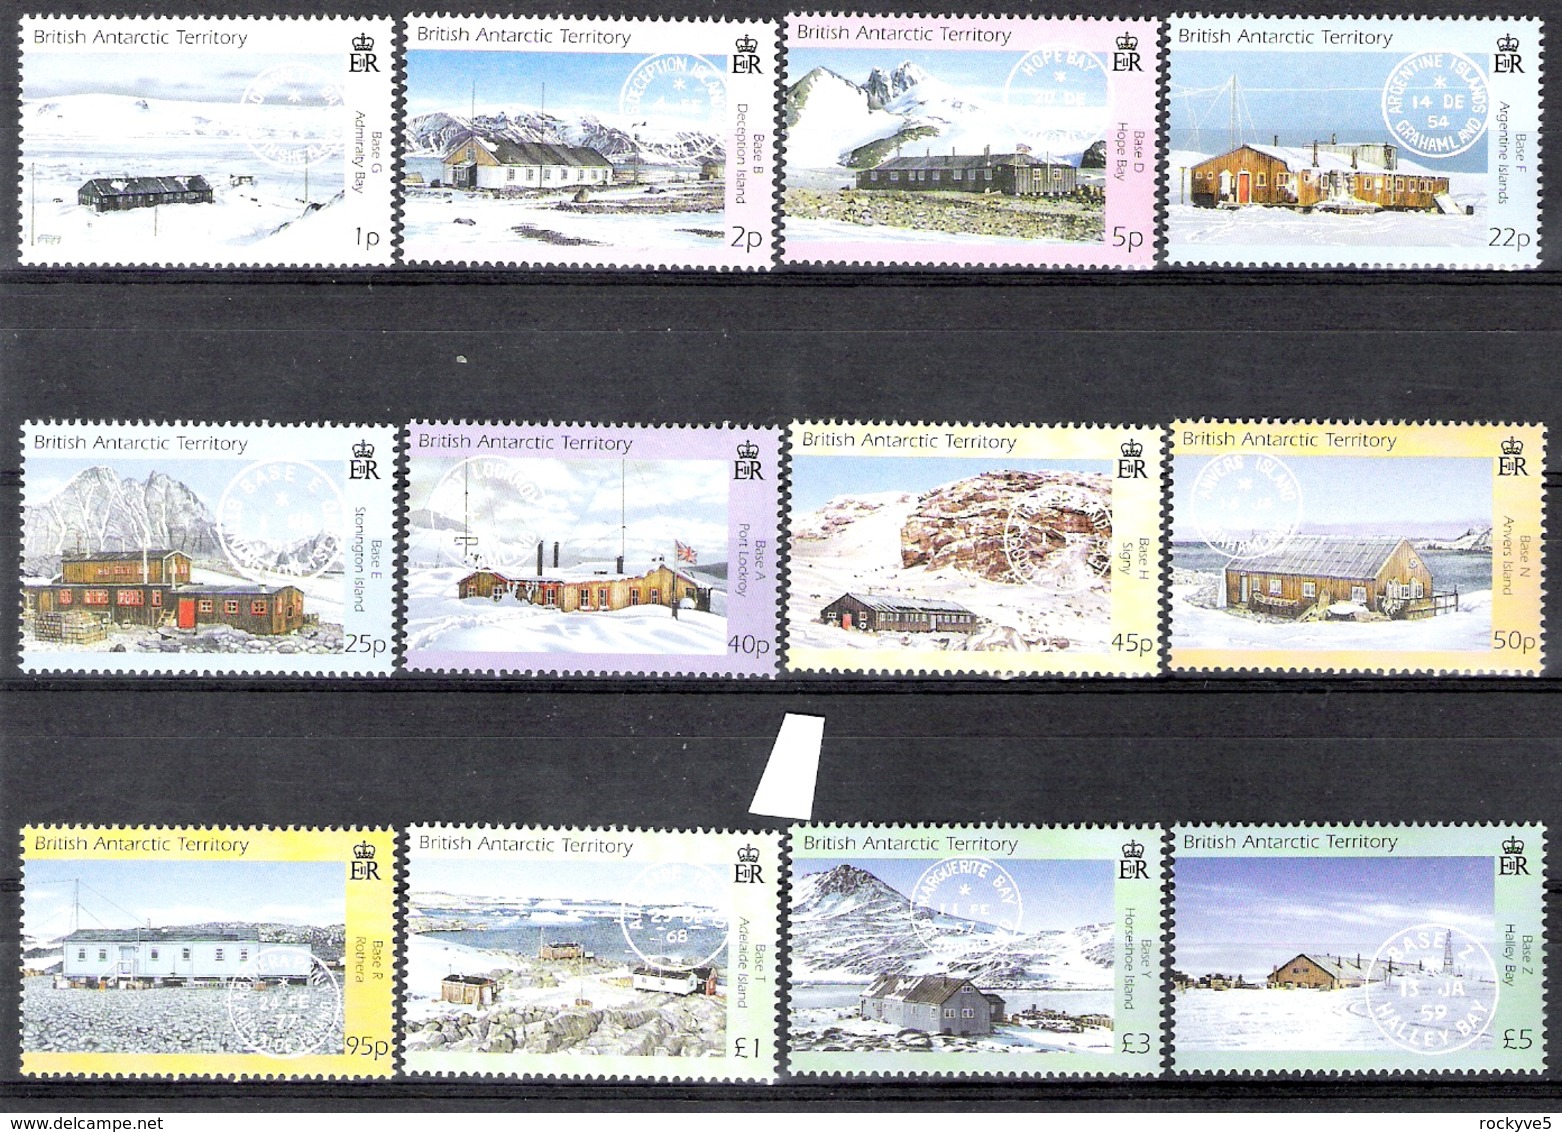 British Antarctic Territory 2003 Research Bases And Postmarks Definitives MNH CV £46 (2 Scans) - Unused Stamps